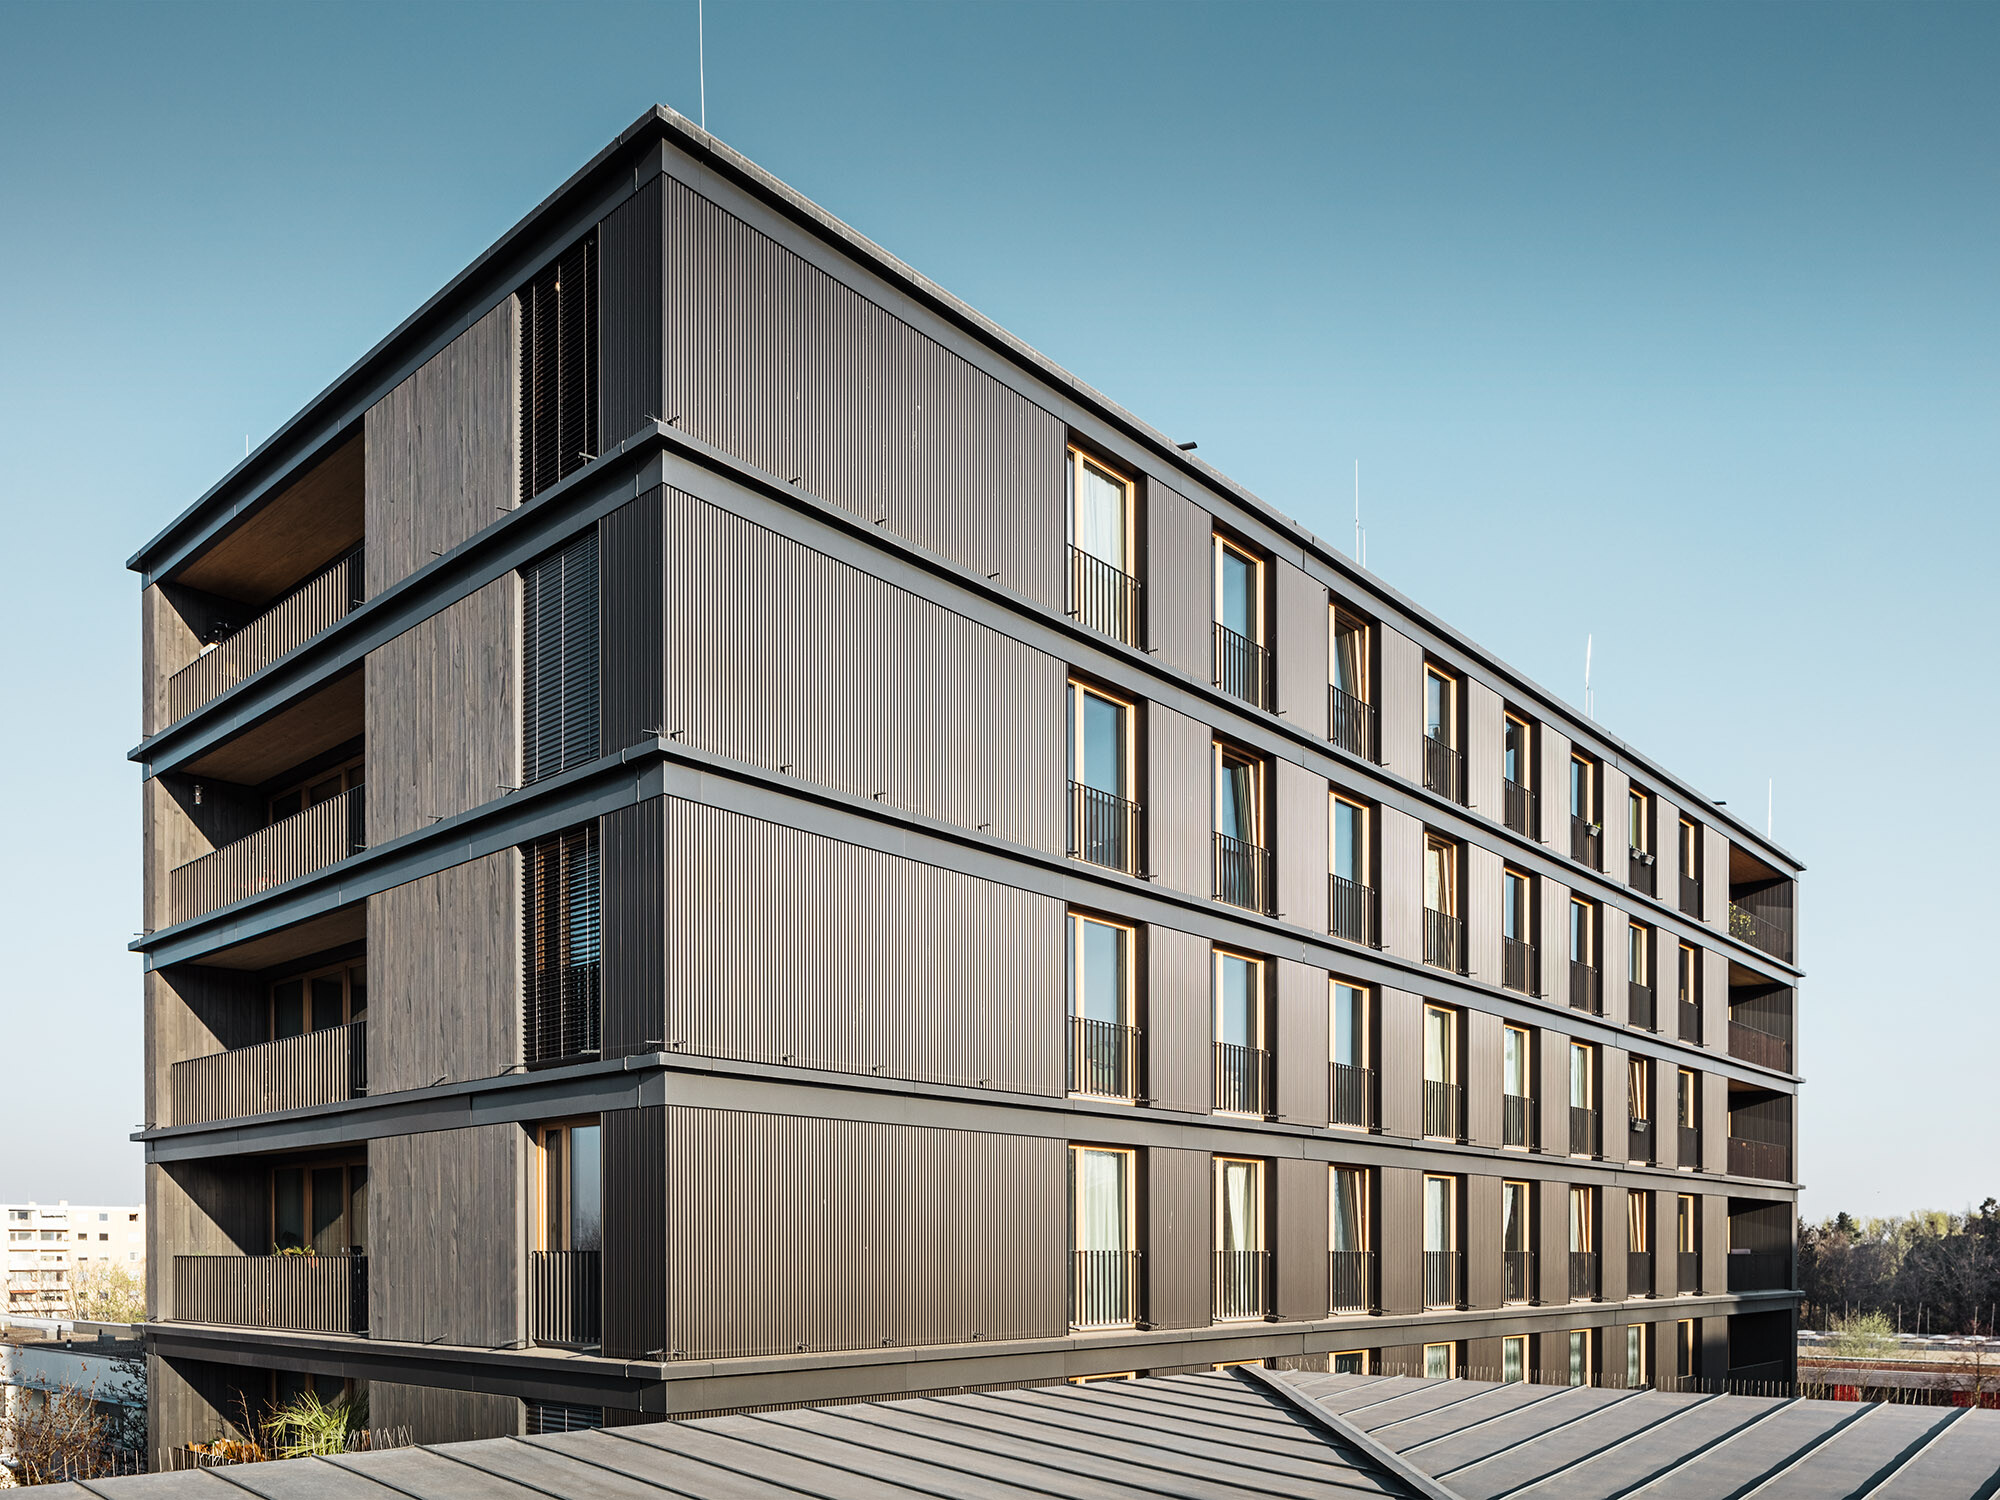  The residential and commercial building from the side: it is difficult to tell the difference between the PREFA ripple profile and the timber façade.